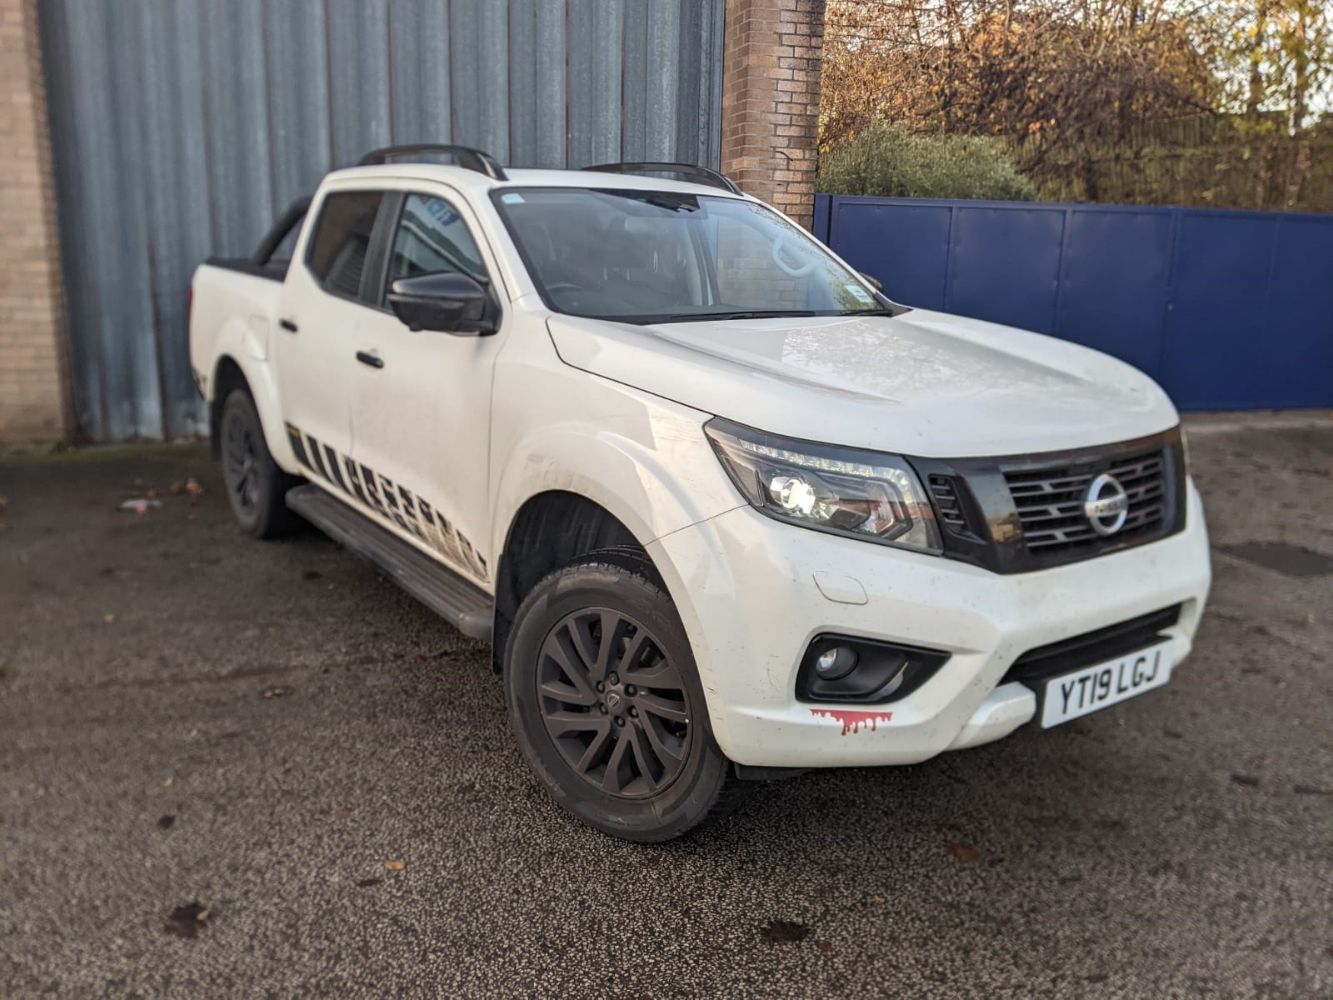 Motor Vehicle Sale | 19' Nissan Navara Special Ed | Mercedes Sprinter | Peugeot Boxer | 5T Iveco Luton | Mitsubishi Recovery Vehicle | 10% BP